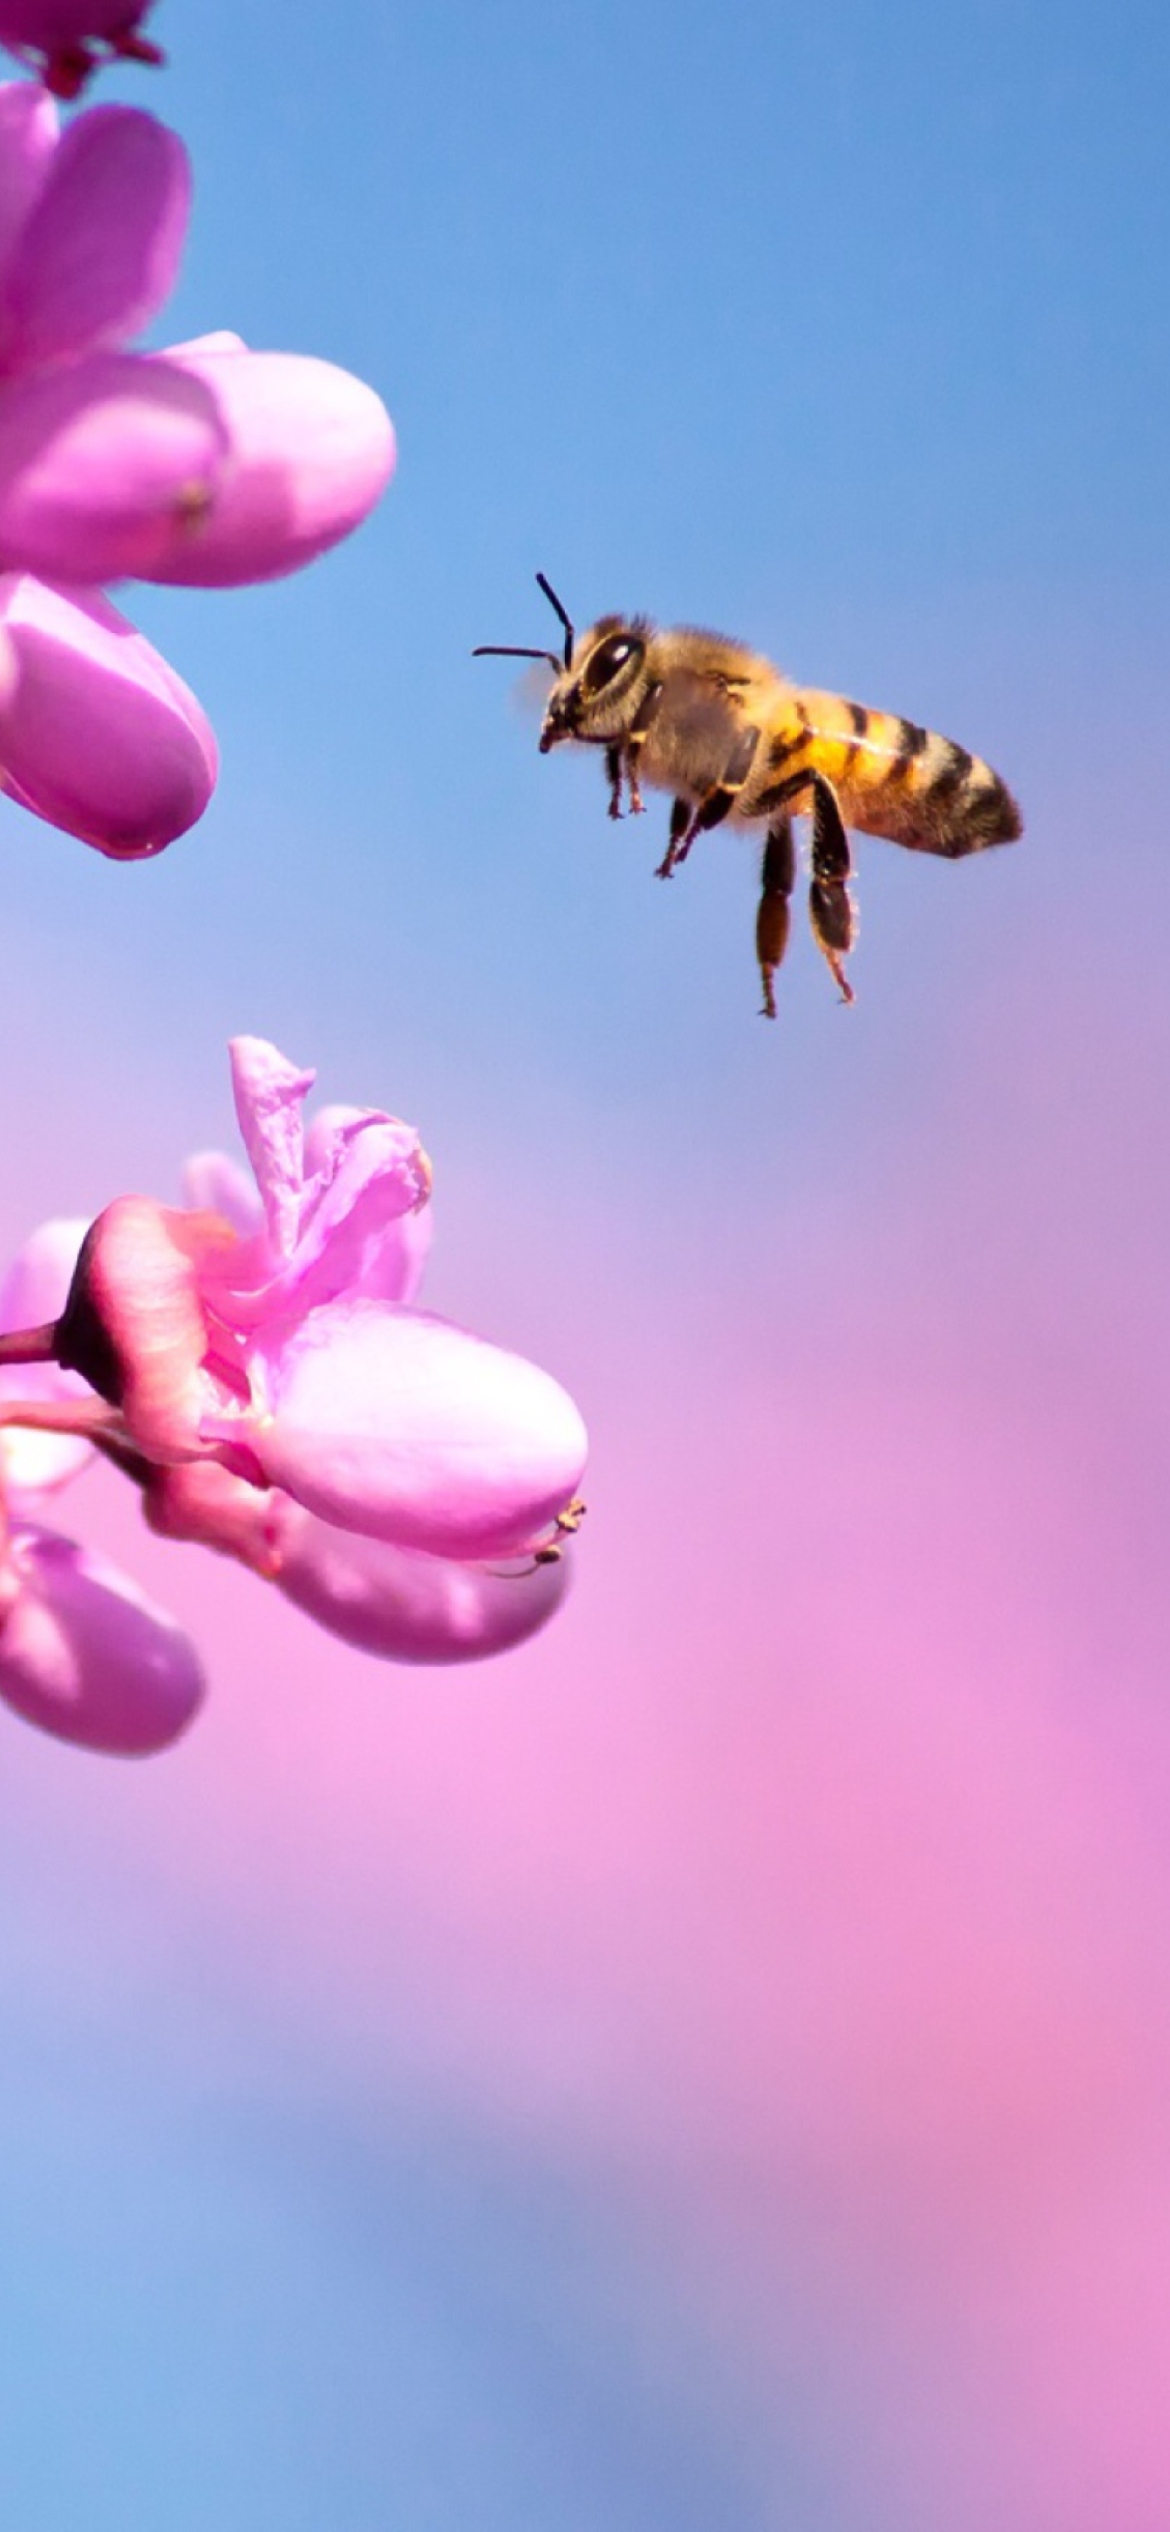 Purple Flowers And Bee wallpaper 1170x2532